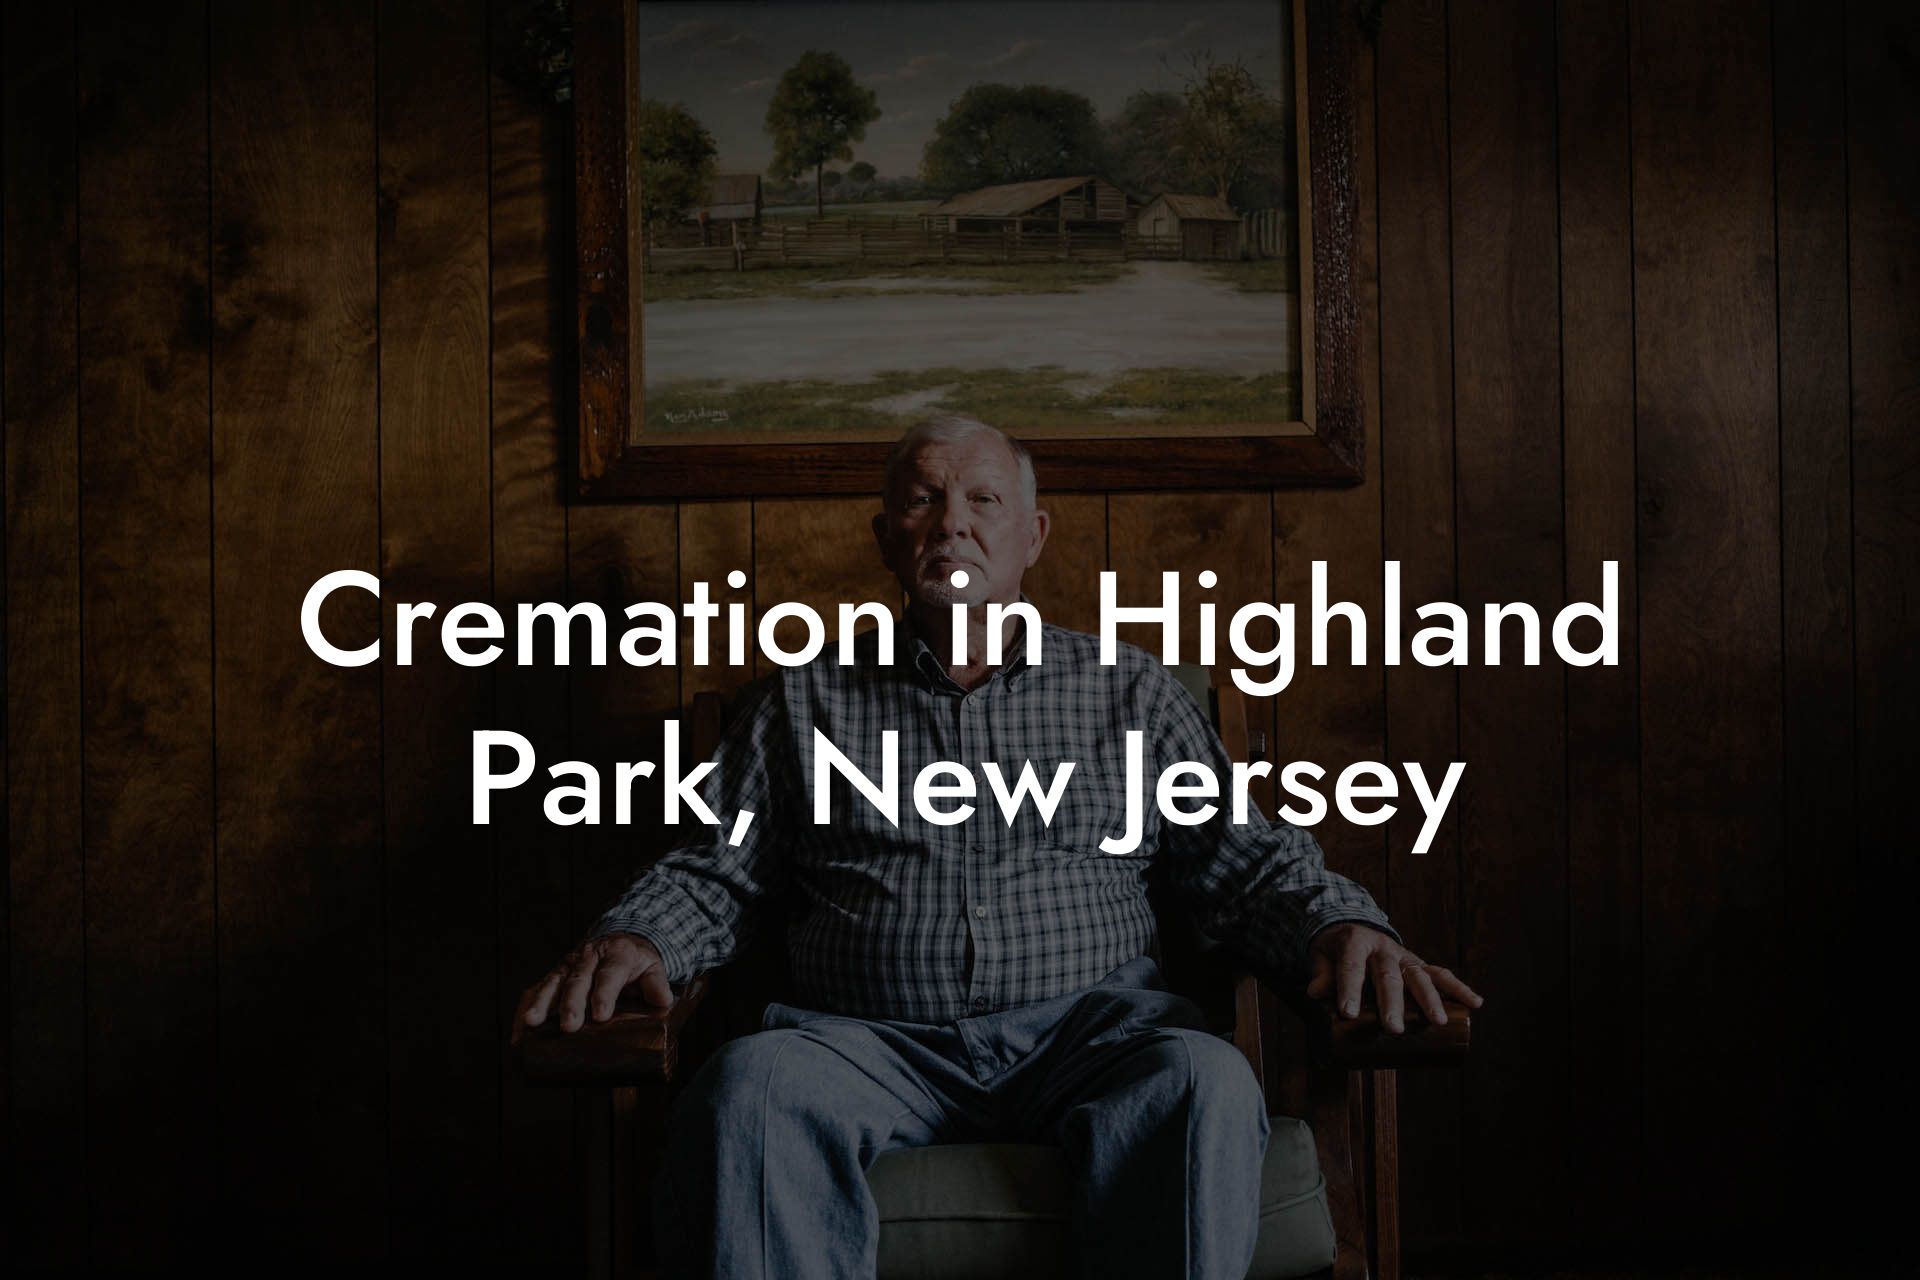 Cremation in Highland Park, New Jersey